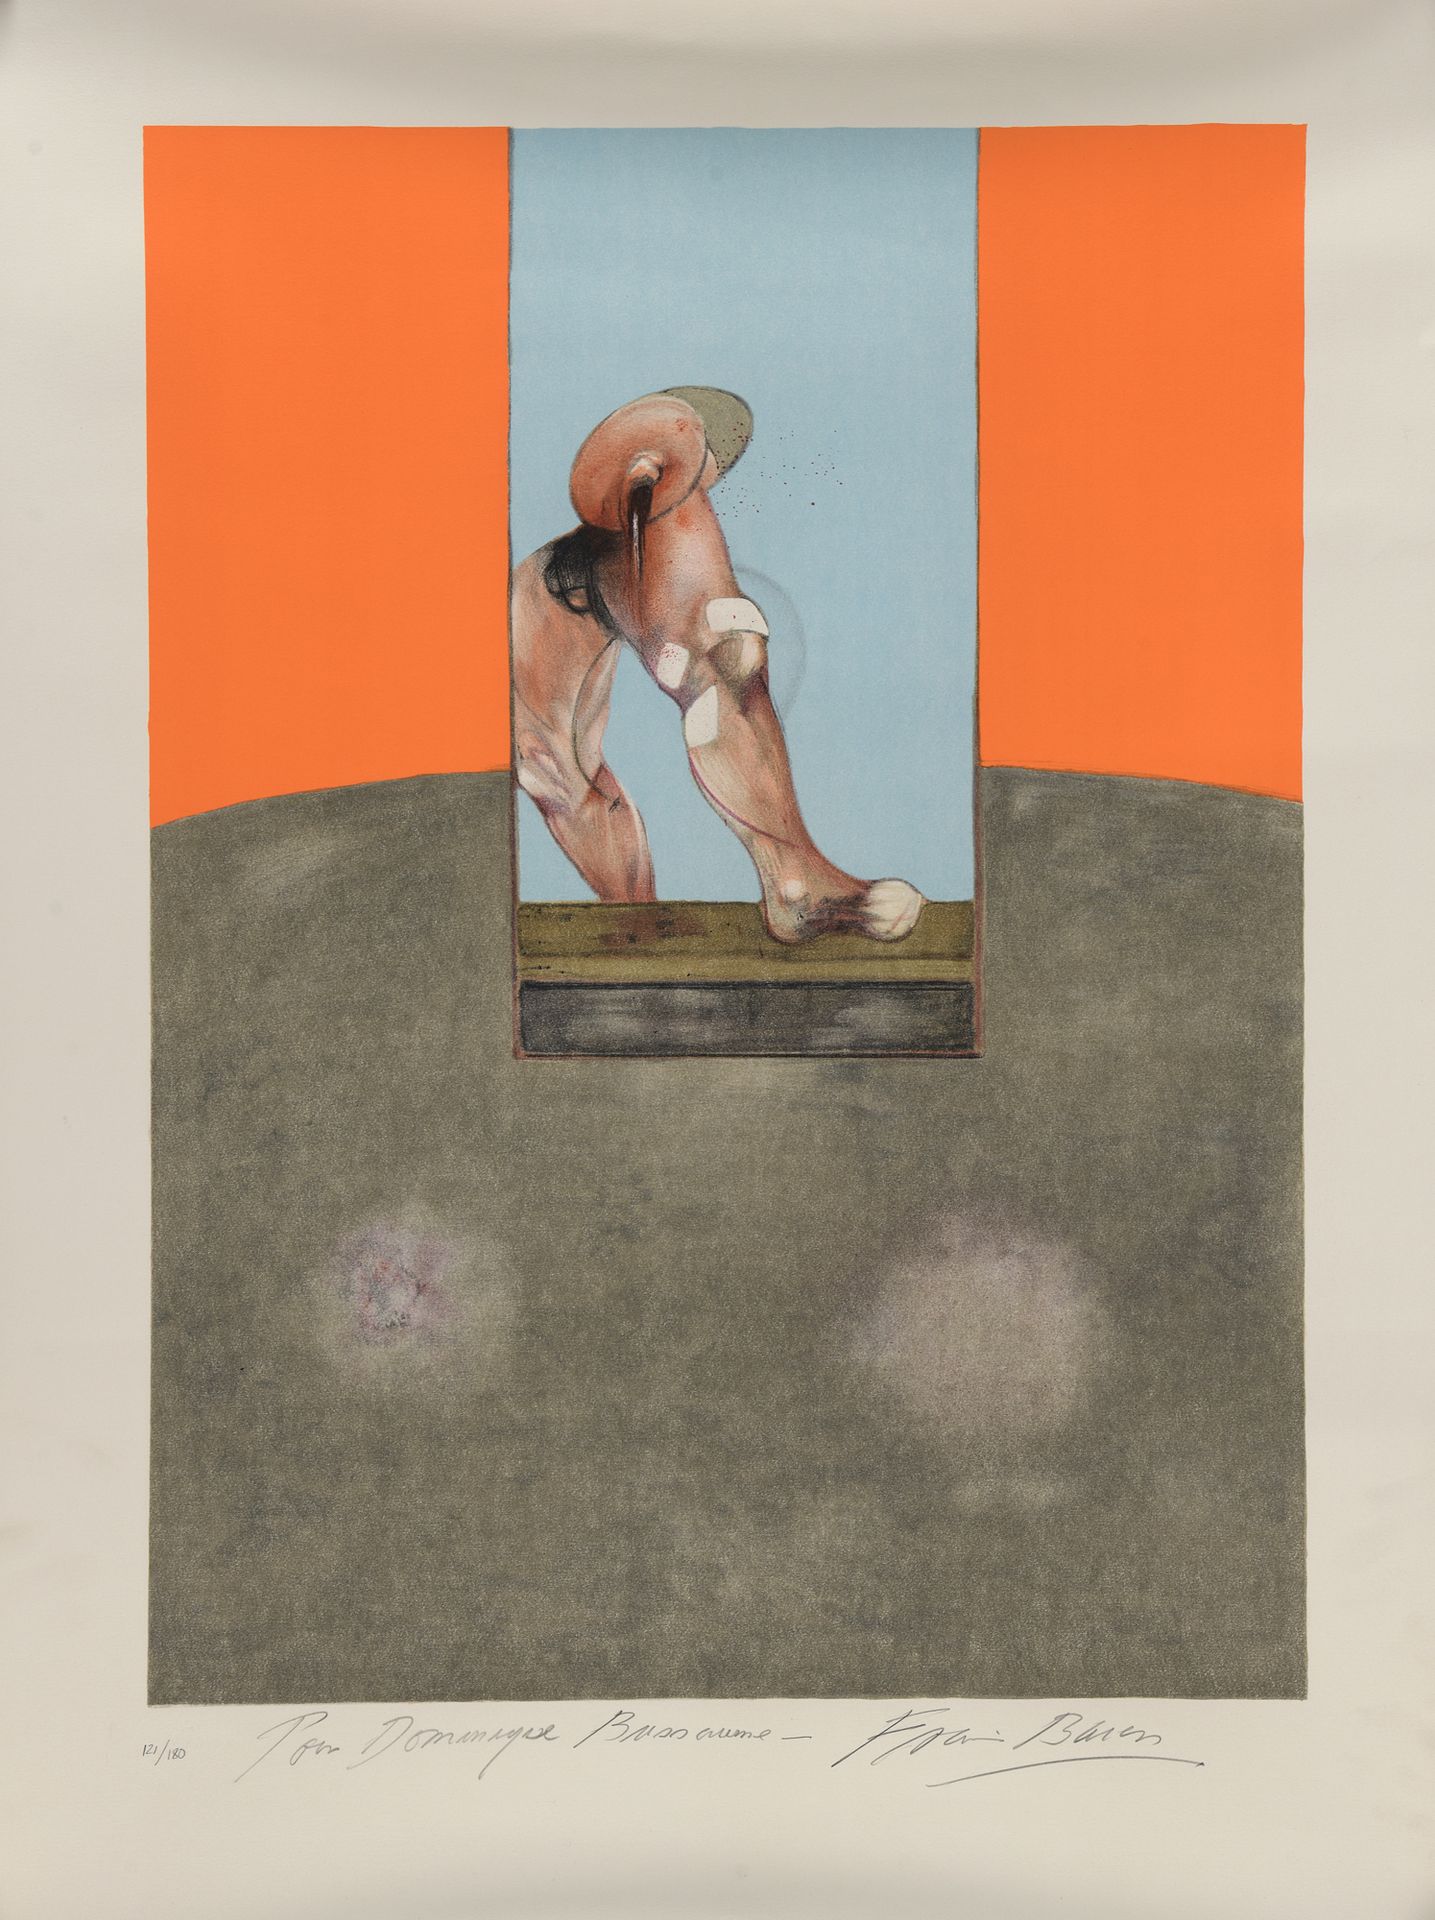 Null Francis BACON (1909-1992)

Triptych, 1987

Farblithografie auf Arches-Papie&hellip;